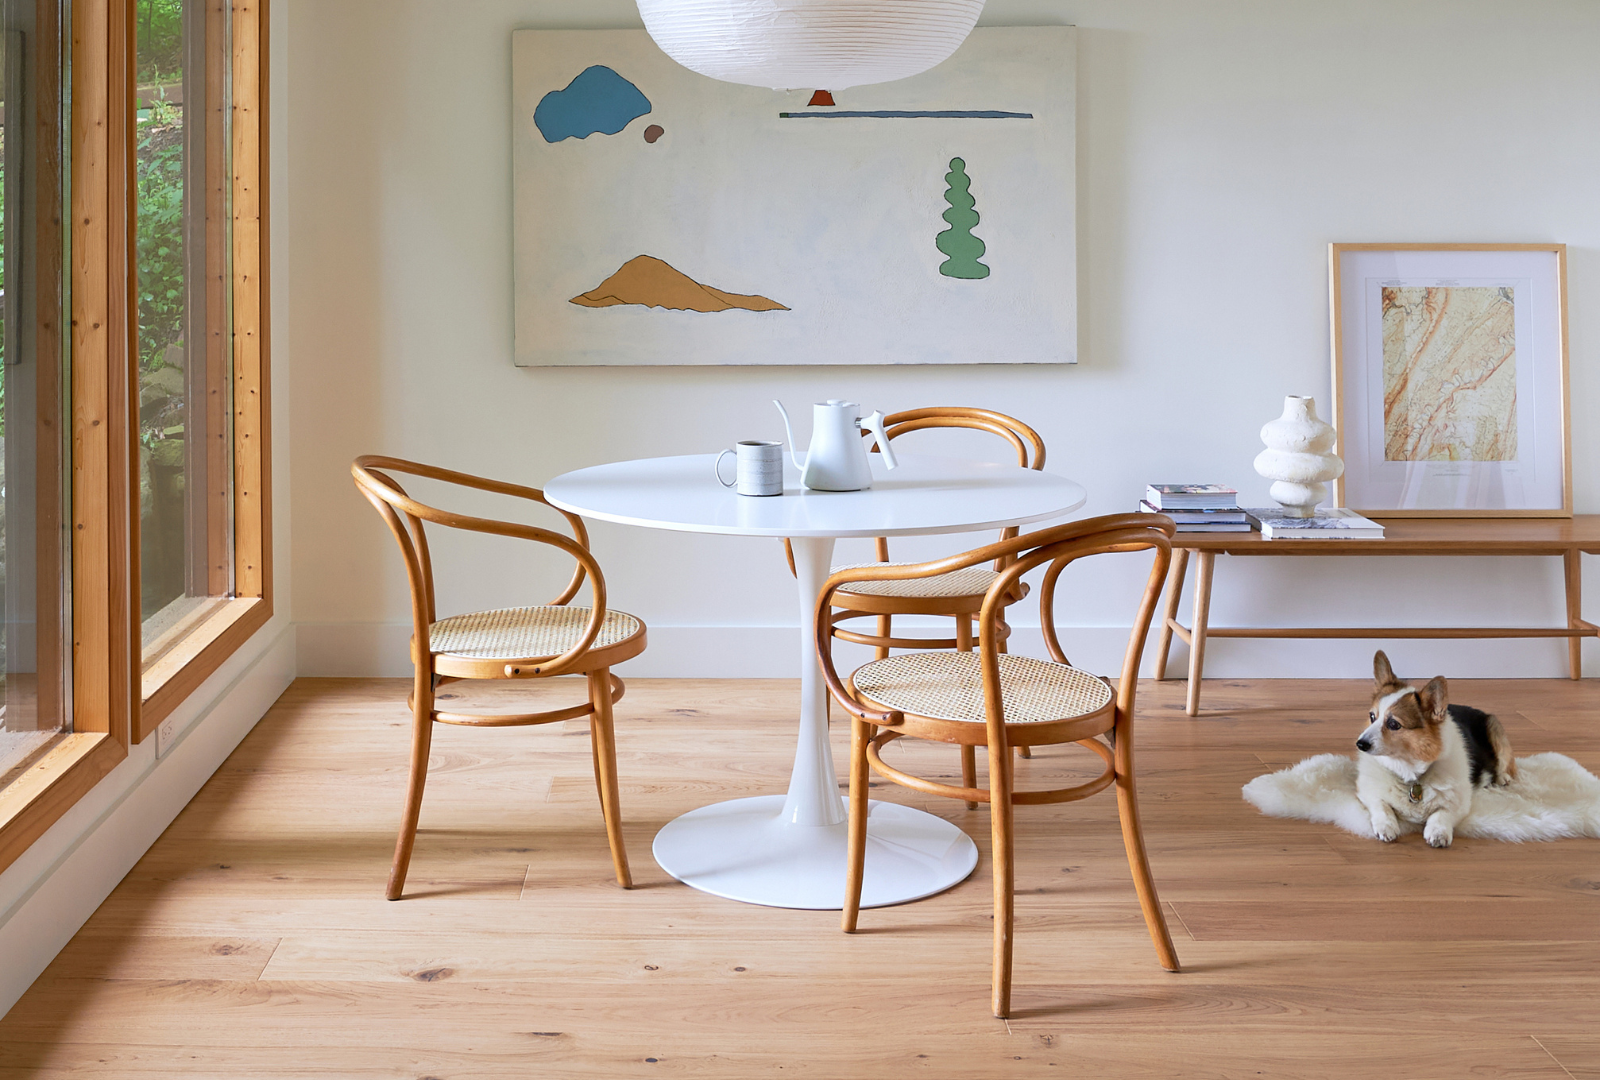 Scandinavian design tulip table and Thonet chairs with white oak flooring in a basement